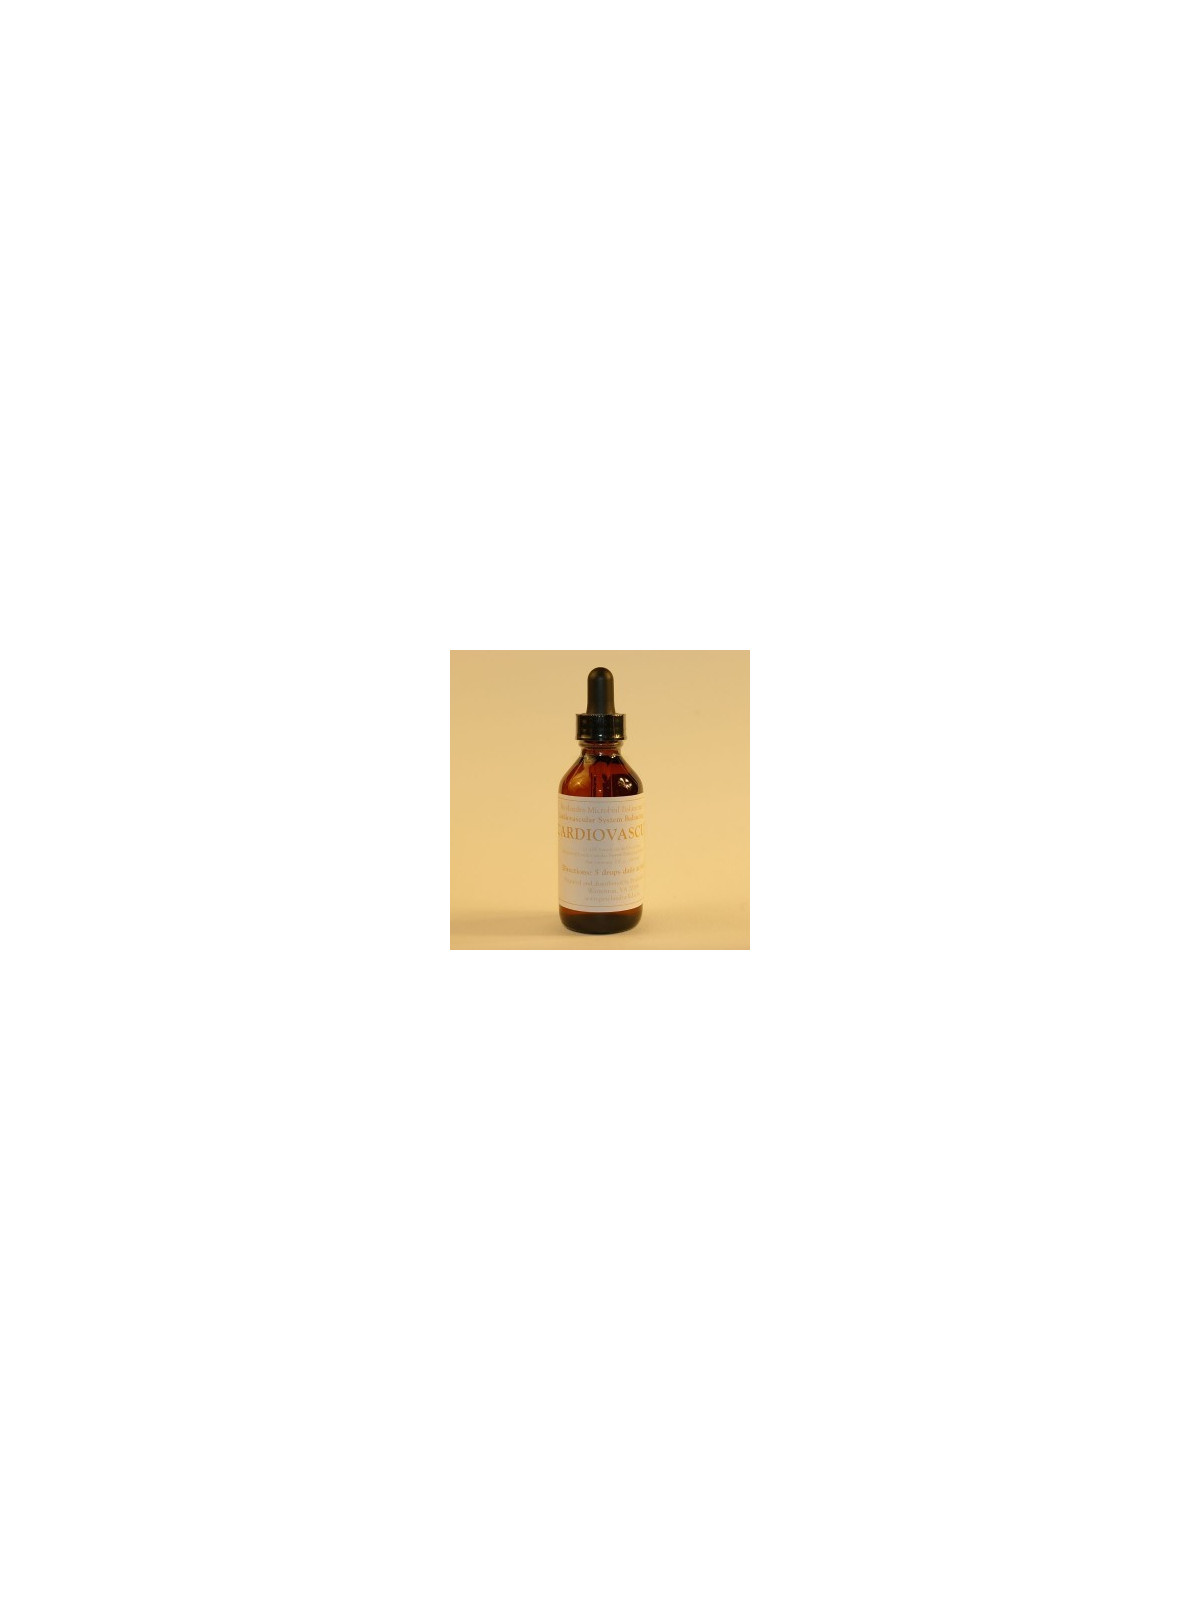 CARDIOVASCULAIRE MBP 15 ML